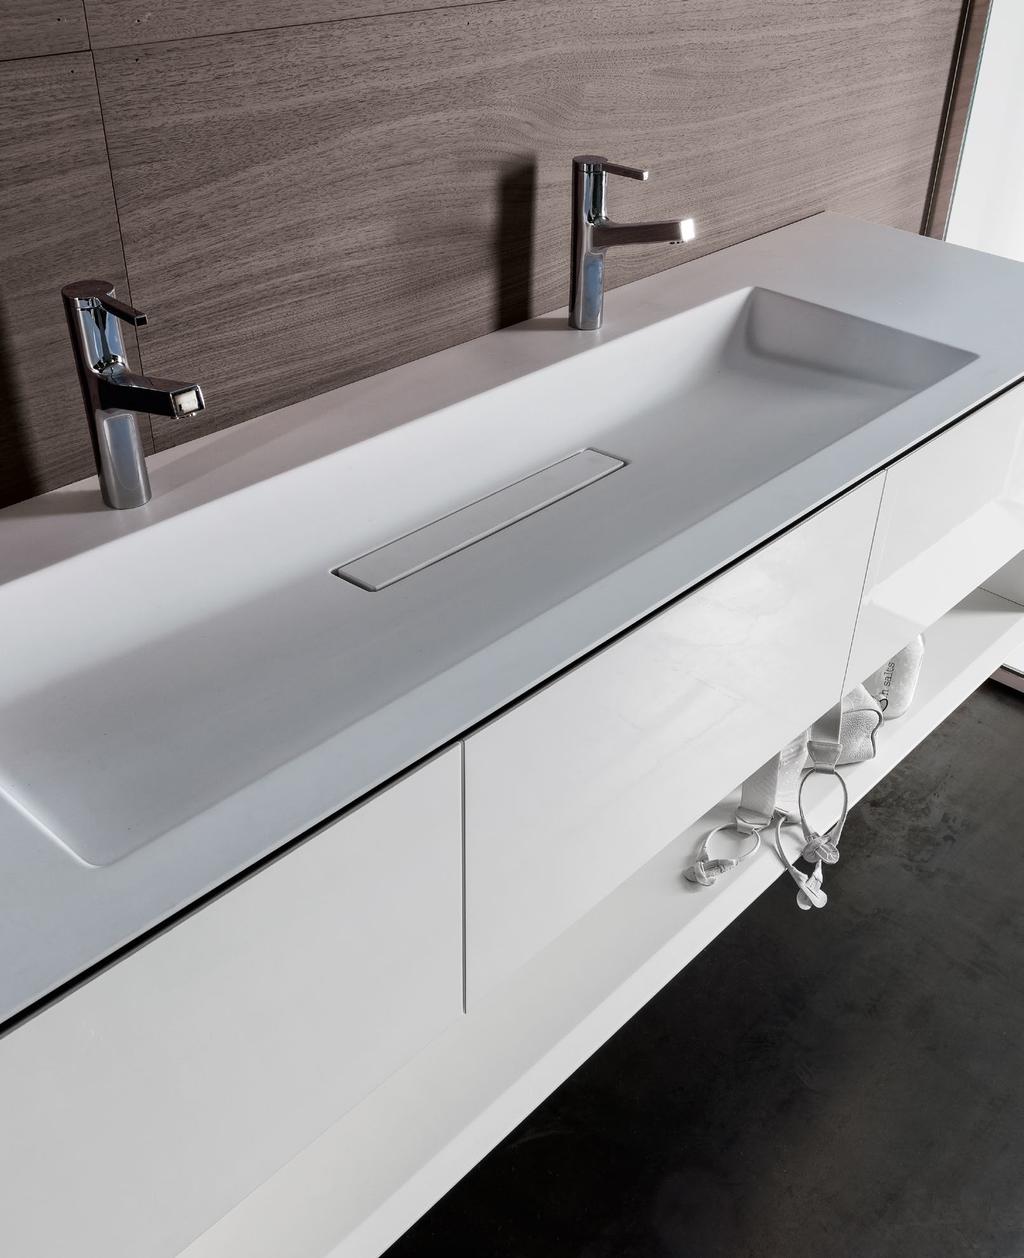 / Furniture with built-in basin mod. LARGE, furniture with drawers and open compartment, grooved handle. Picture: top with built-in central basin in biobased Cristalplant mod.